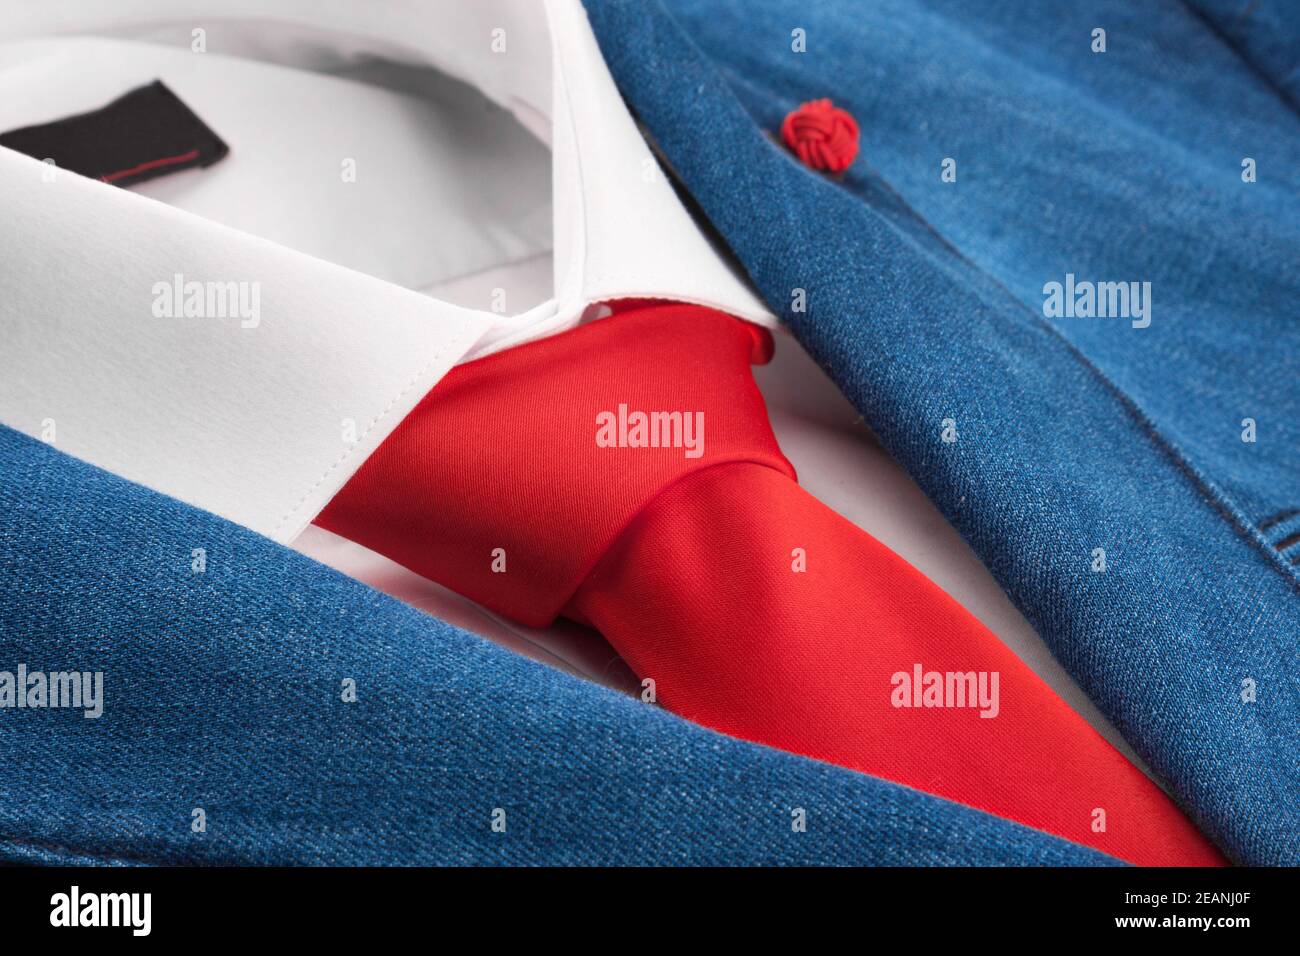 Denim jacket and red tie, men's fashion Stock Photo